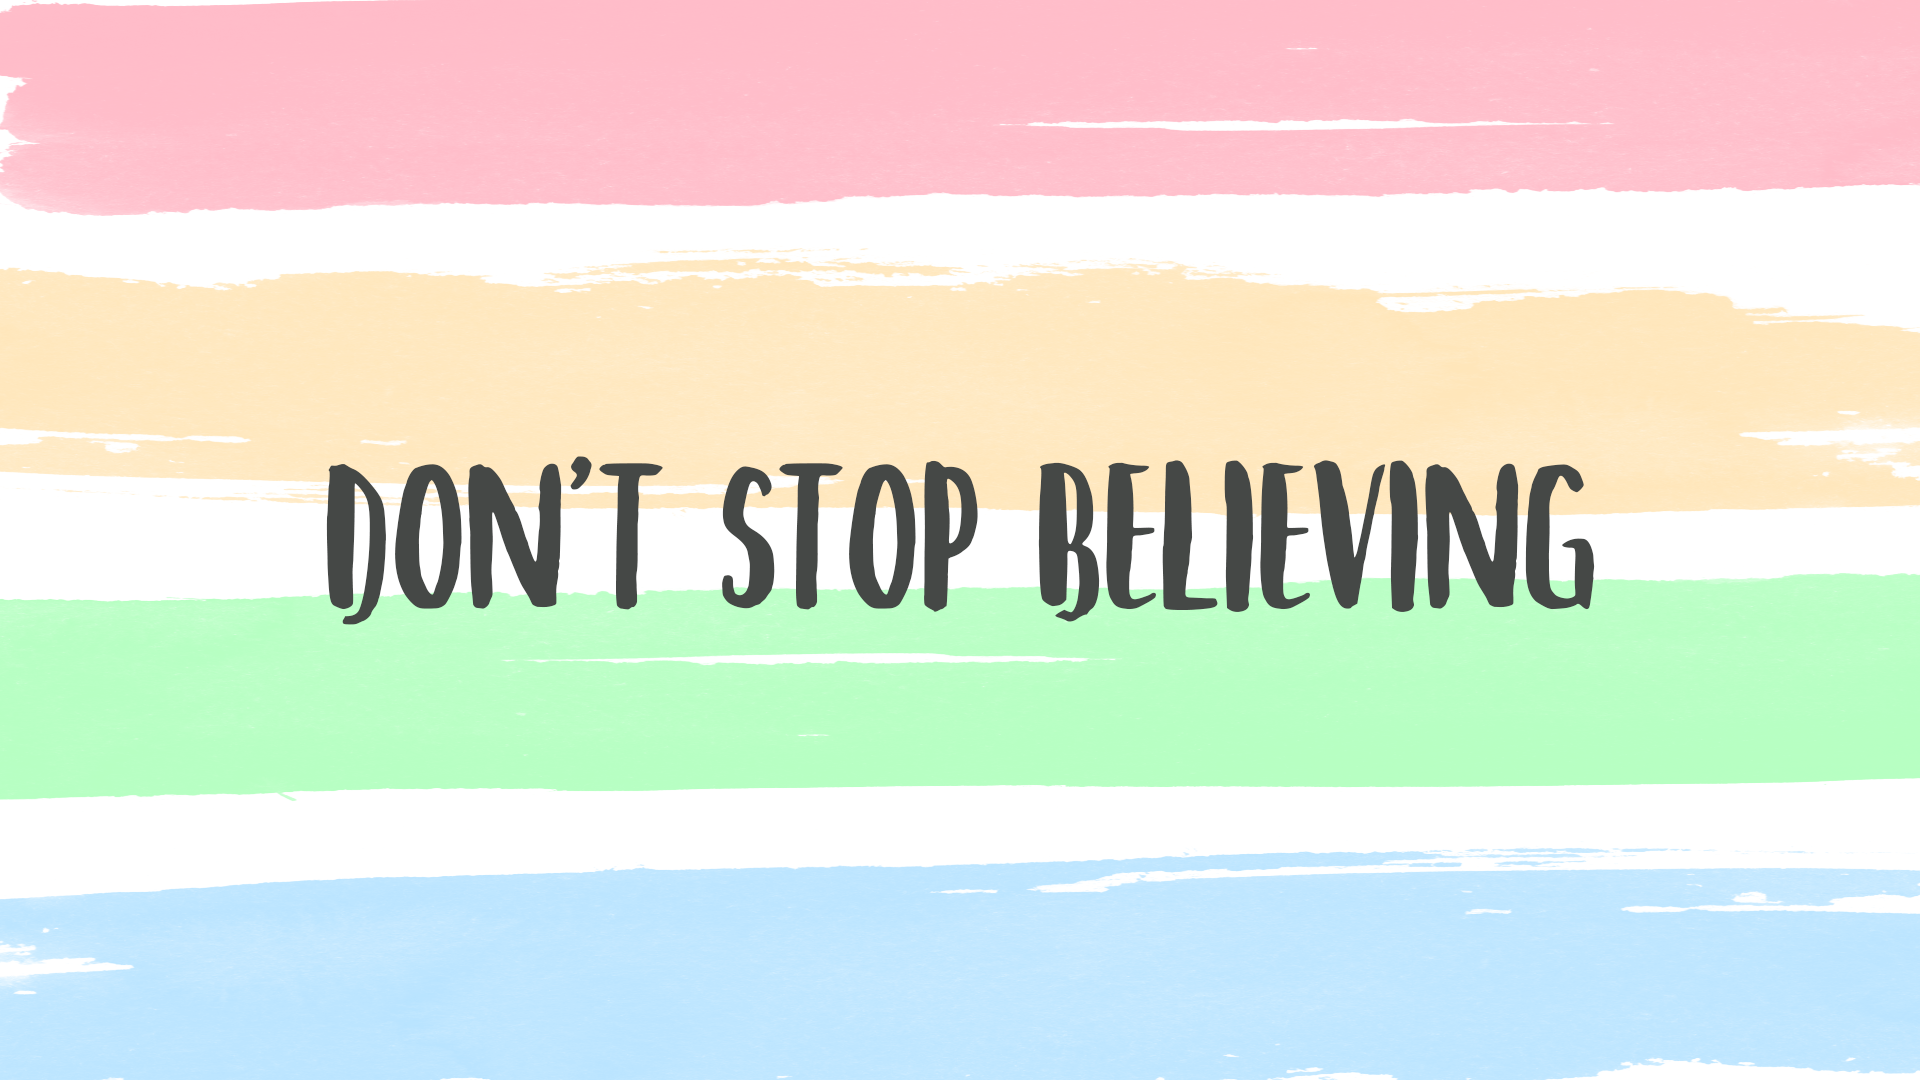 Don't stop believing. motivational quote for desktop background wallpaper. find more t. Laptop wallpaper quotes, Cute desktop wallpaper, Desktop wallpaper quotes